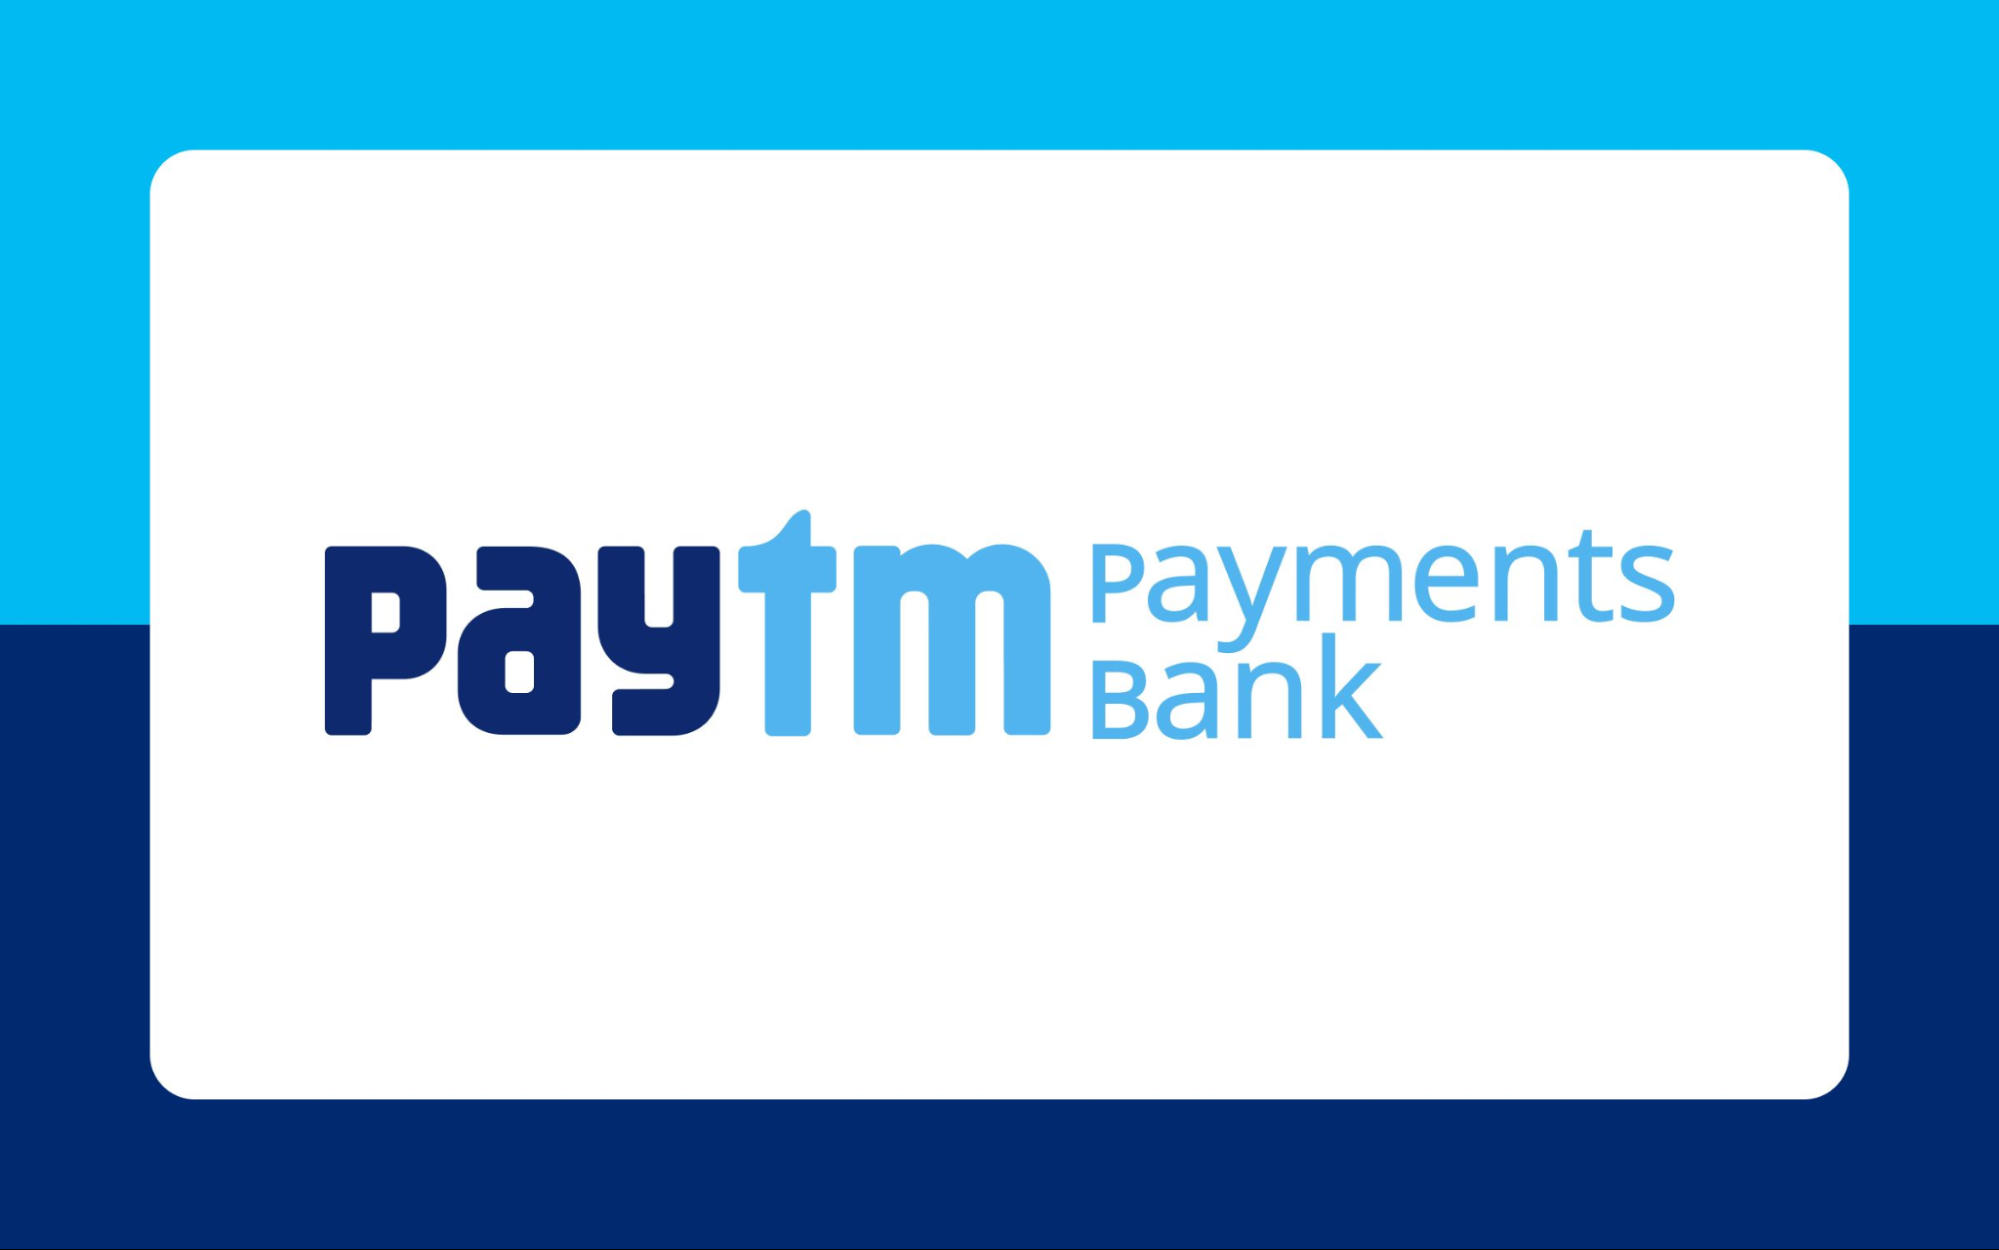 Paytm Payments Bank receives RBI nod to appoint Surinder Chawla as Managing  Director and CEO | Paytm Blog